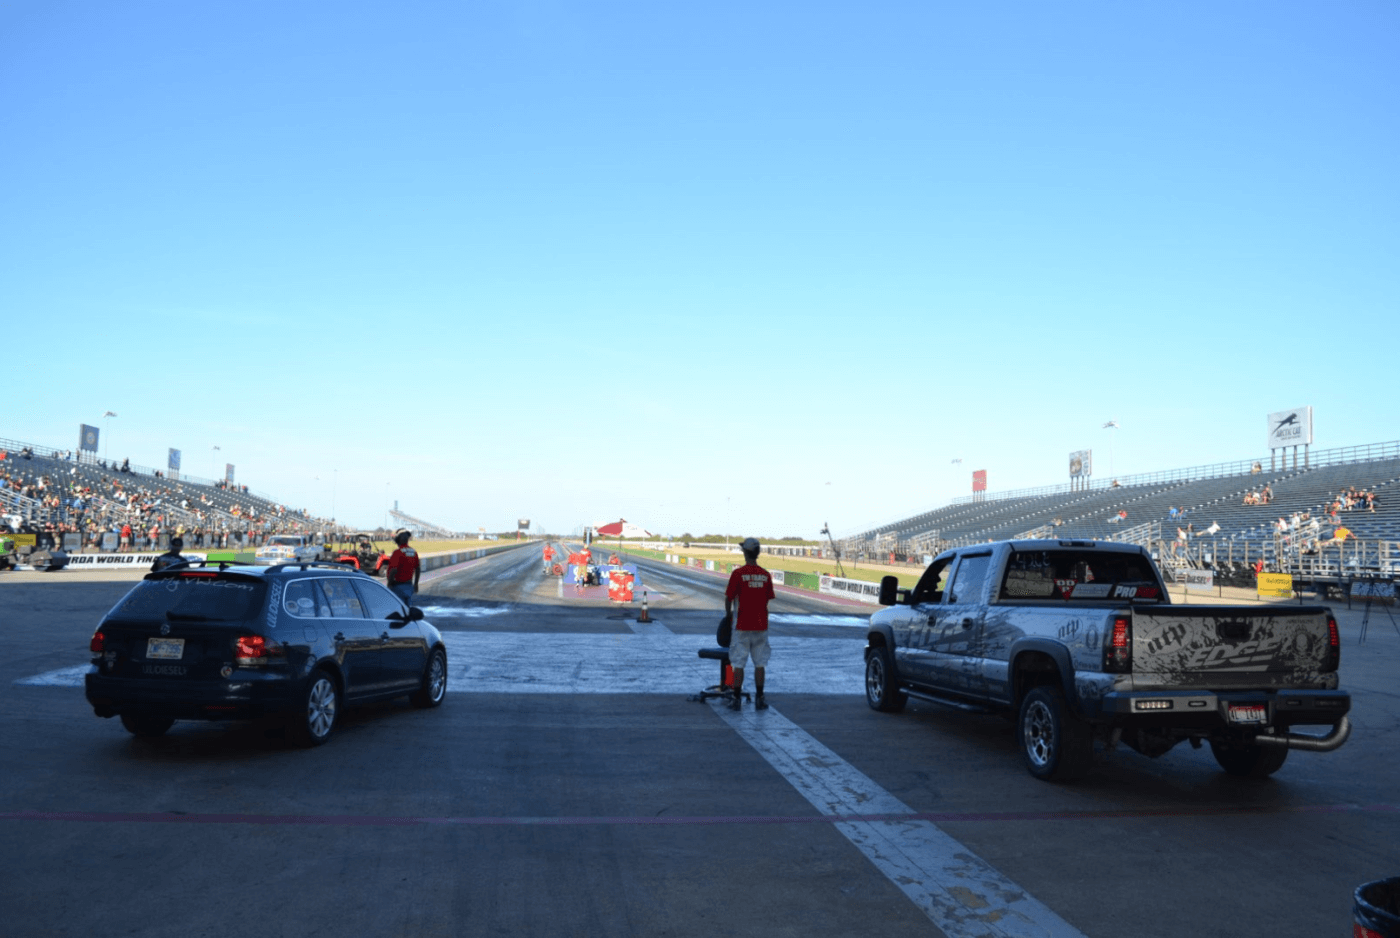 The Sporstsman class final came down to Verlon Southwick (who'd already won Super Diesel) and Trey Sikes, who piloted his diesel-powered Jetta to a close win over Verlon.